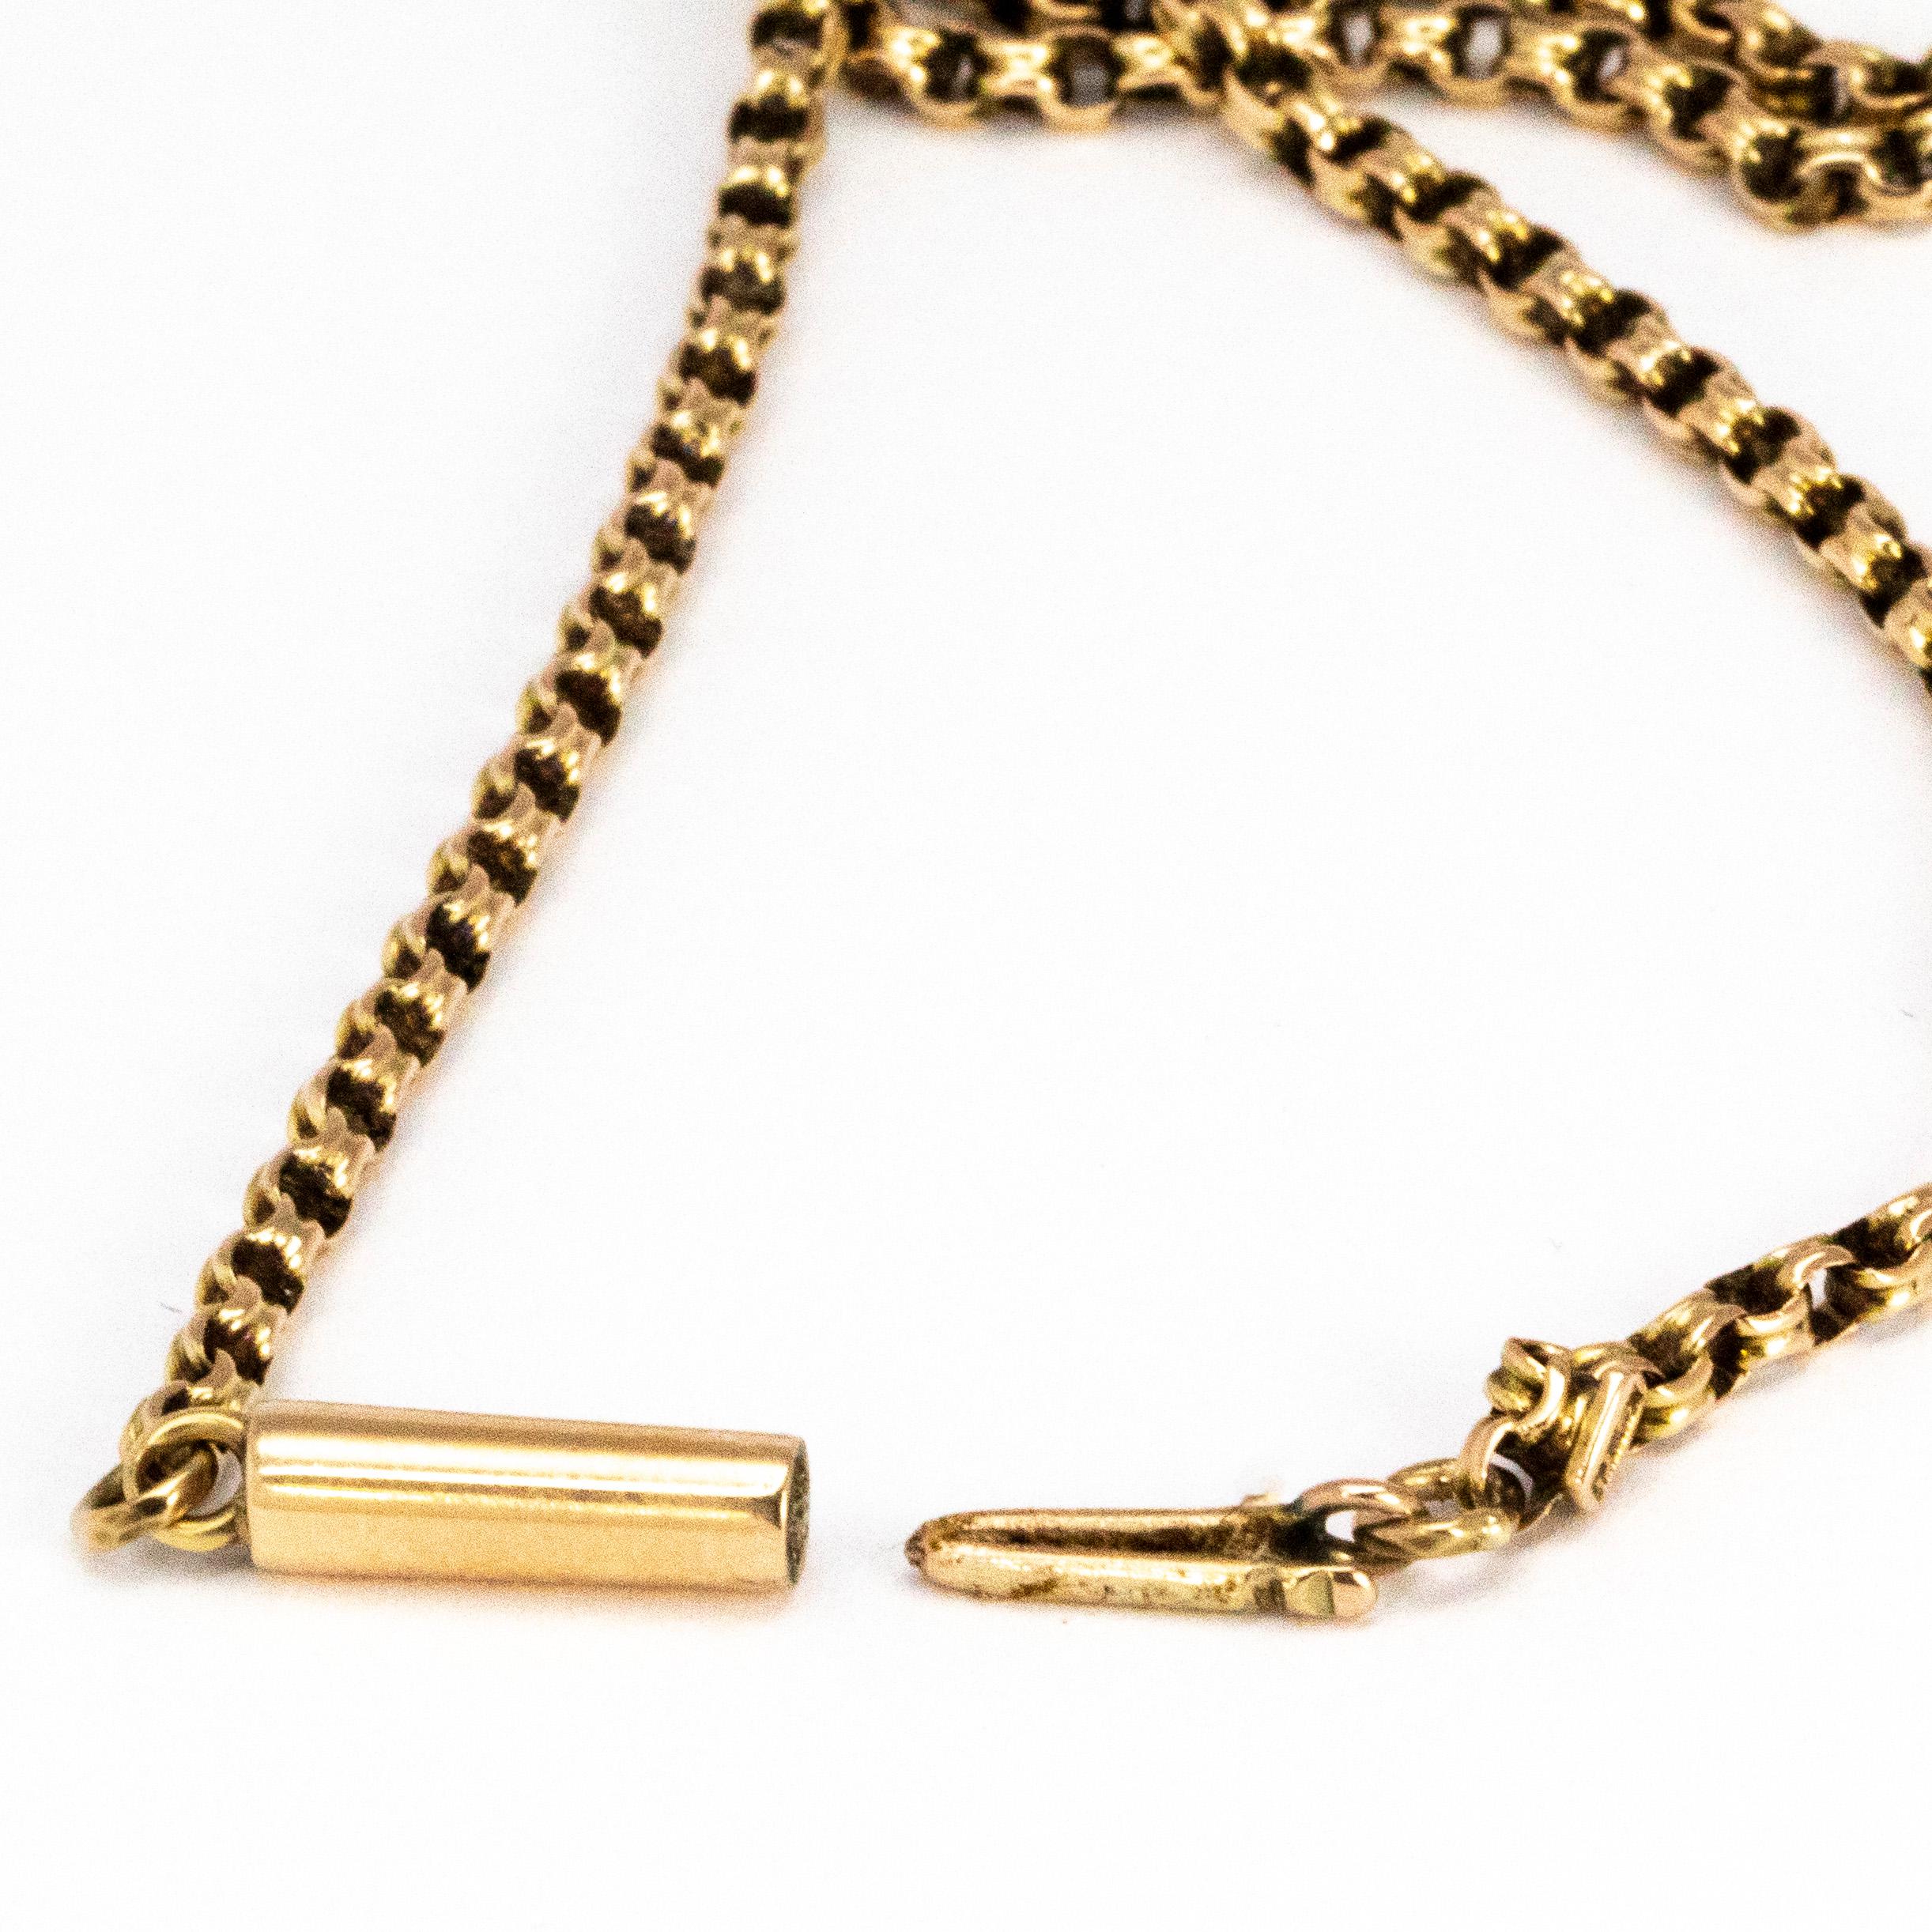 9 carat gold chain with cross